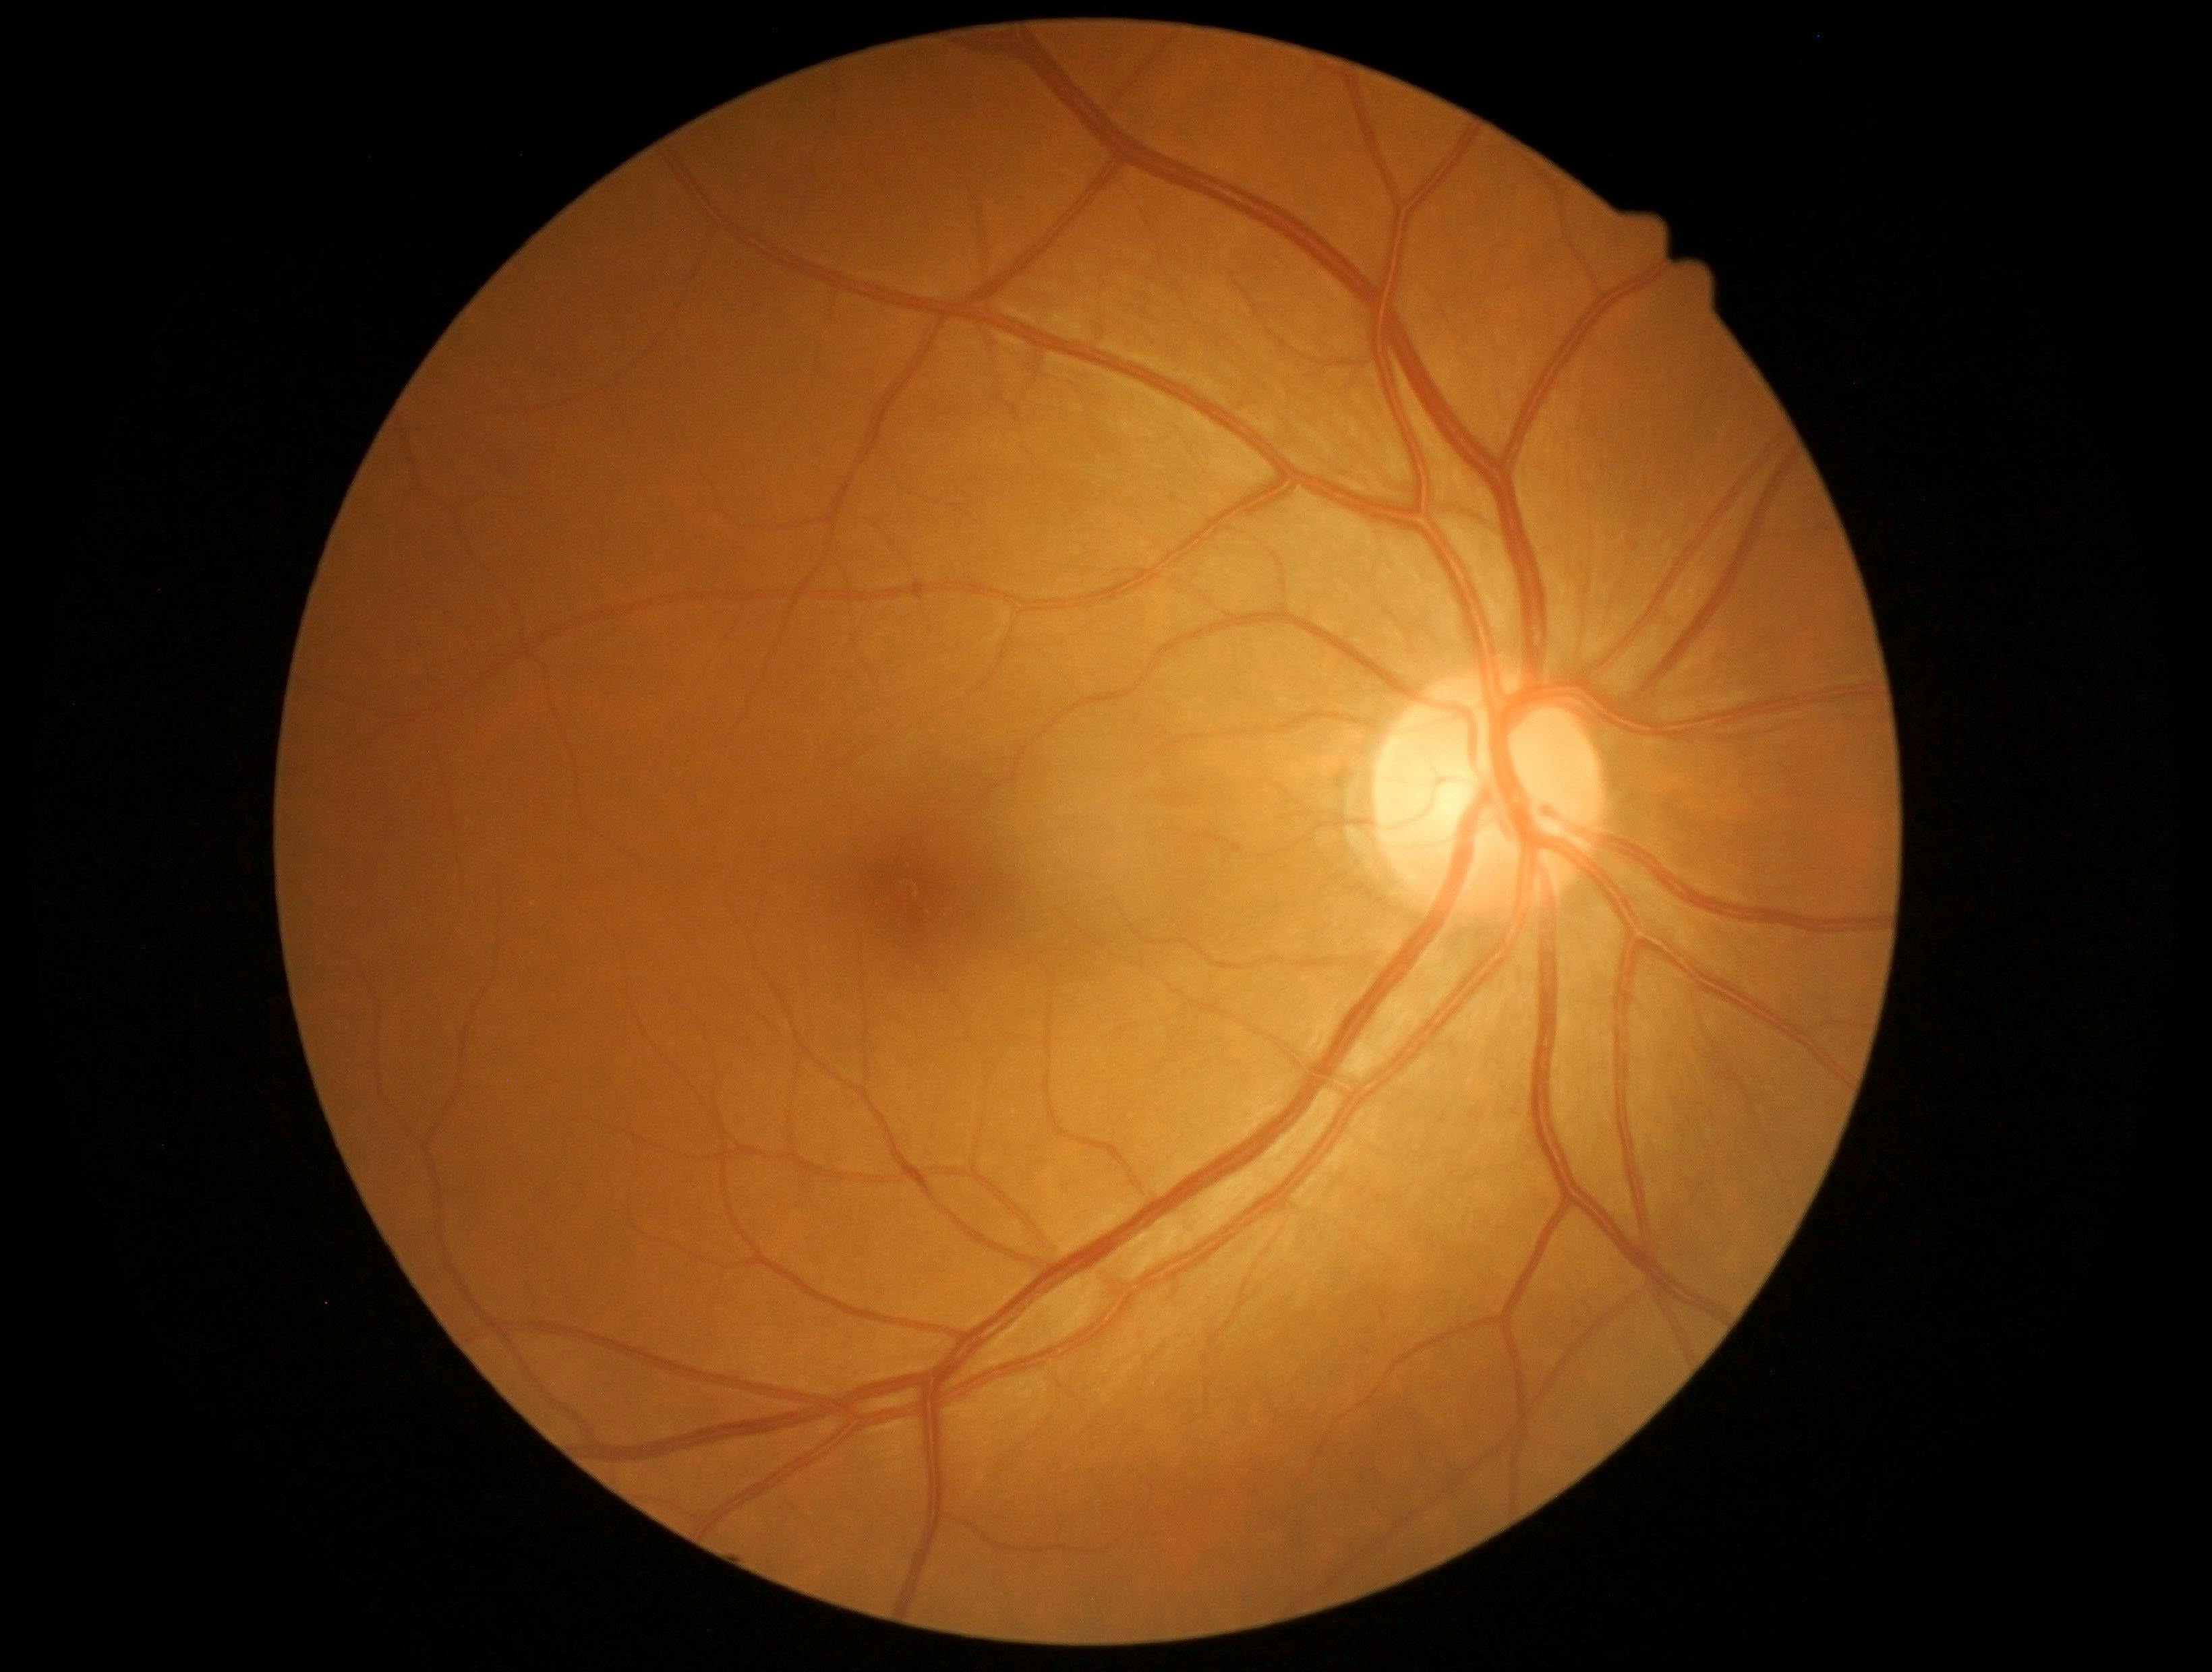 Infants with acute ROP remain at risk of vision-threatening outcomes in later life